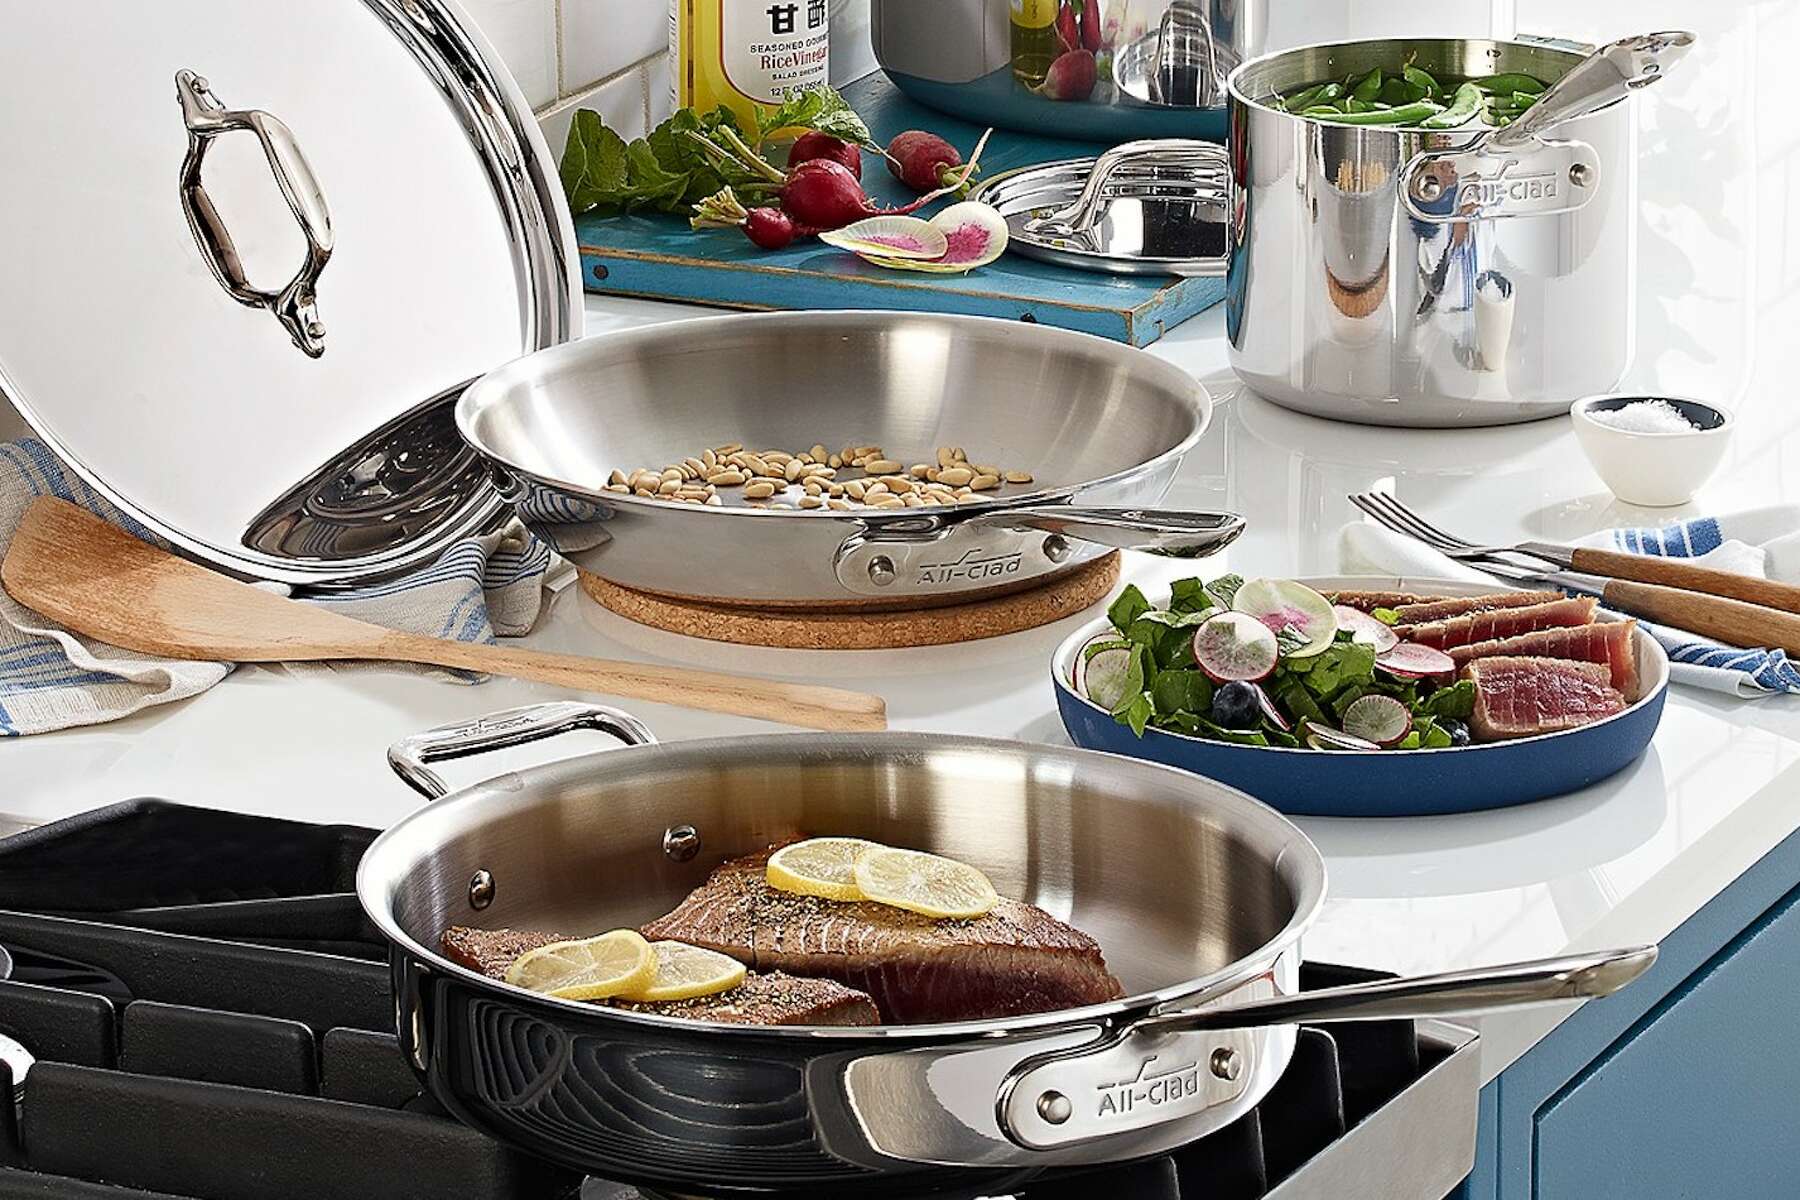 All-Clad cookware: Our favorite nonstick All-Clad cookware set is